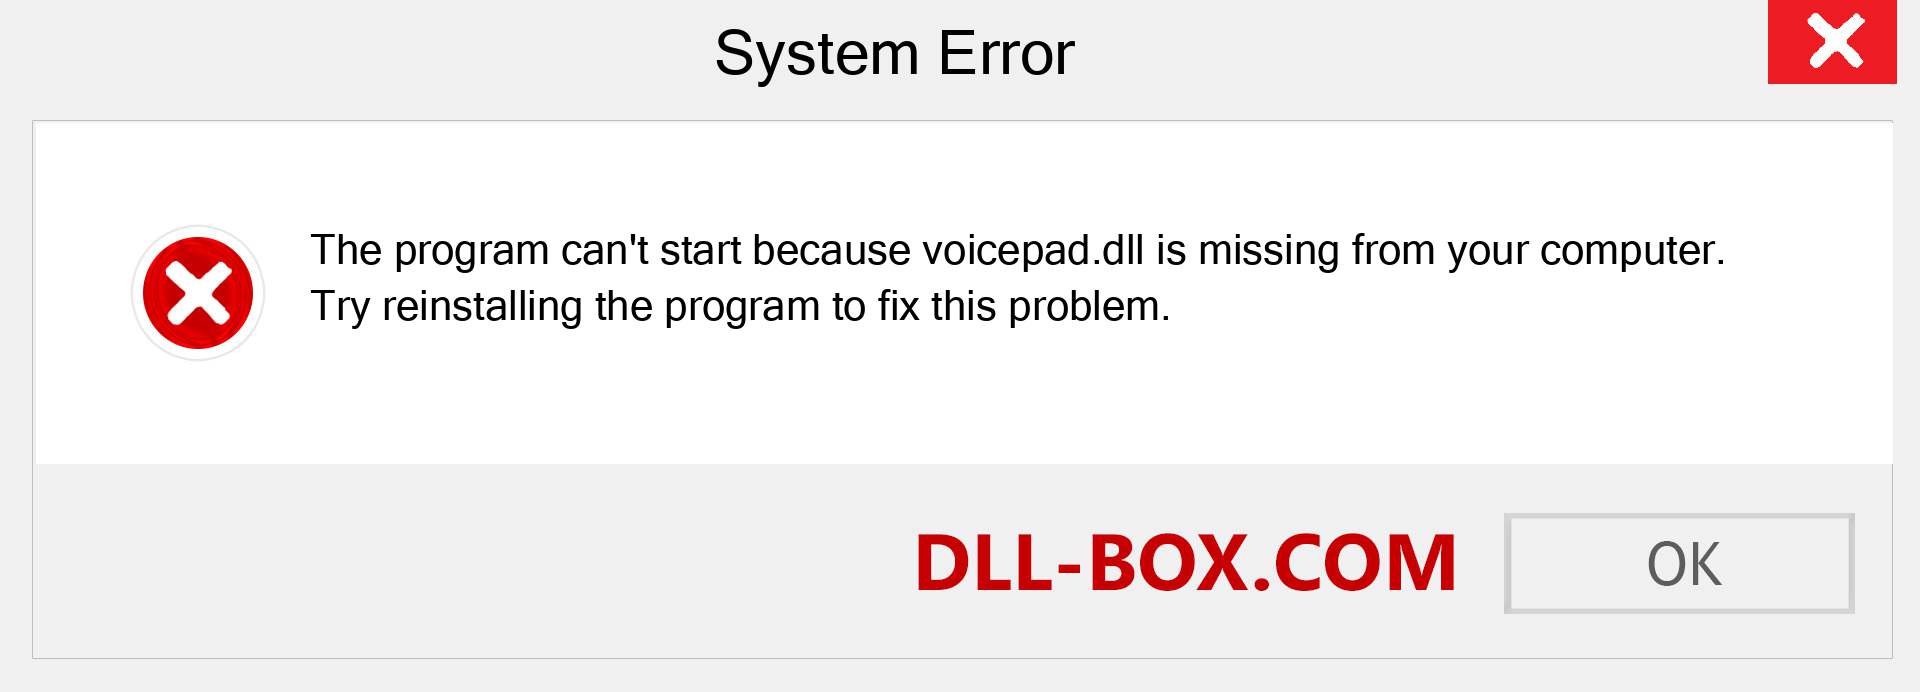  voicepad.dll file is missing?. Download for Windows 7, 8, 10 - Fix  voicepad dll Missing Error on Windows, photos, images